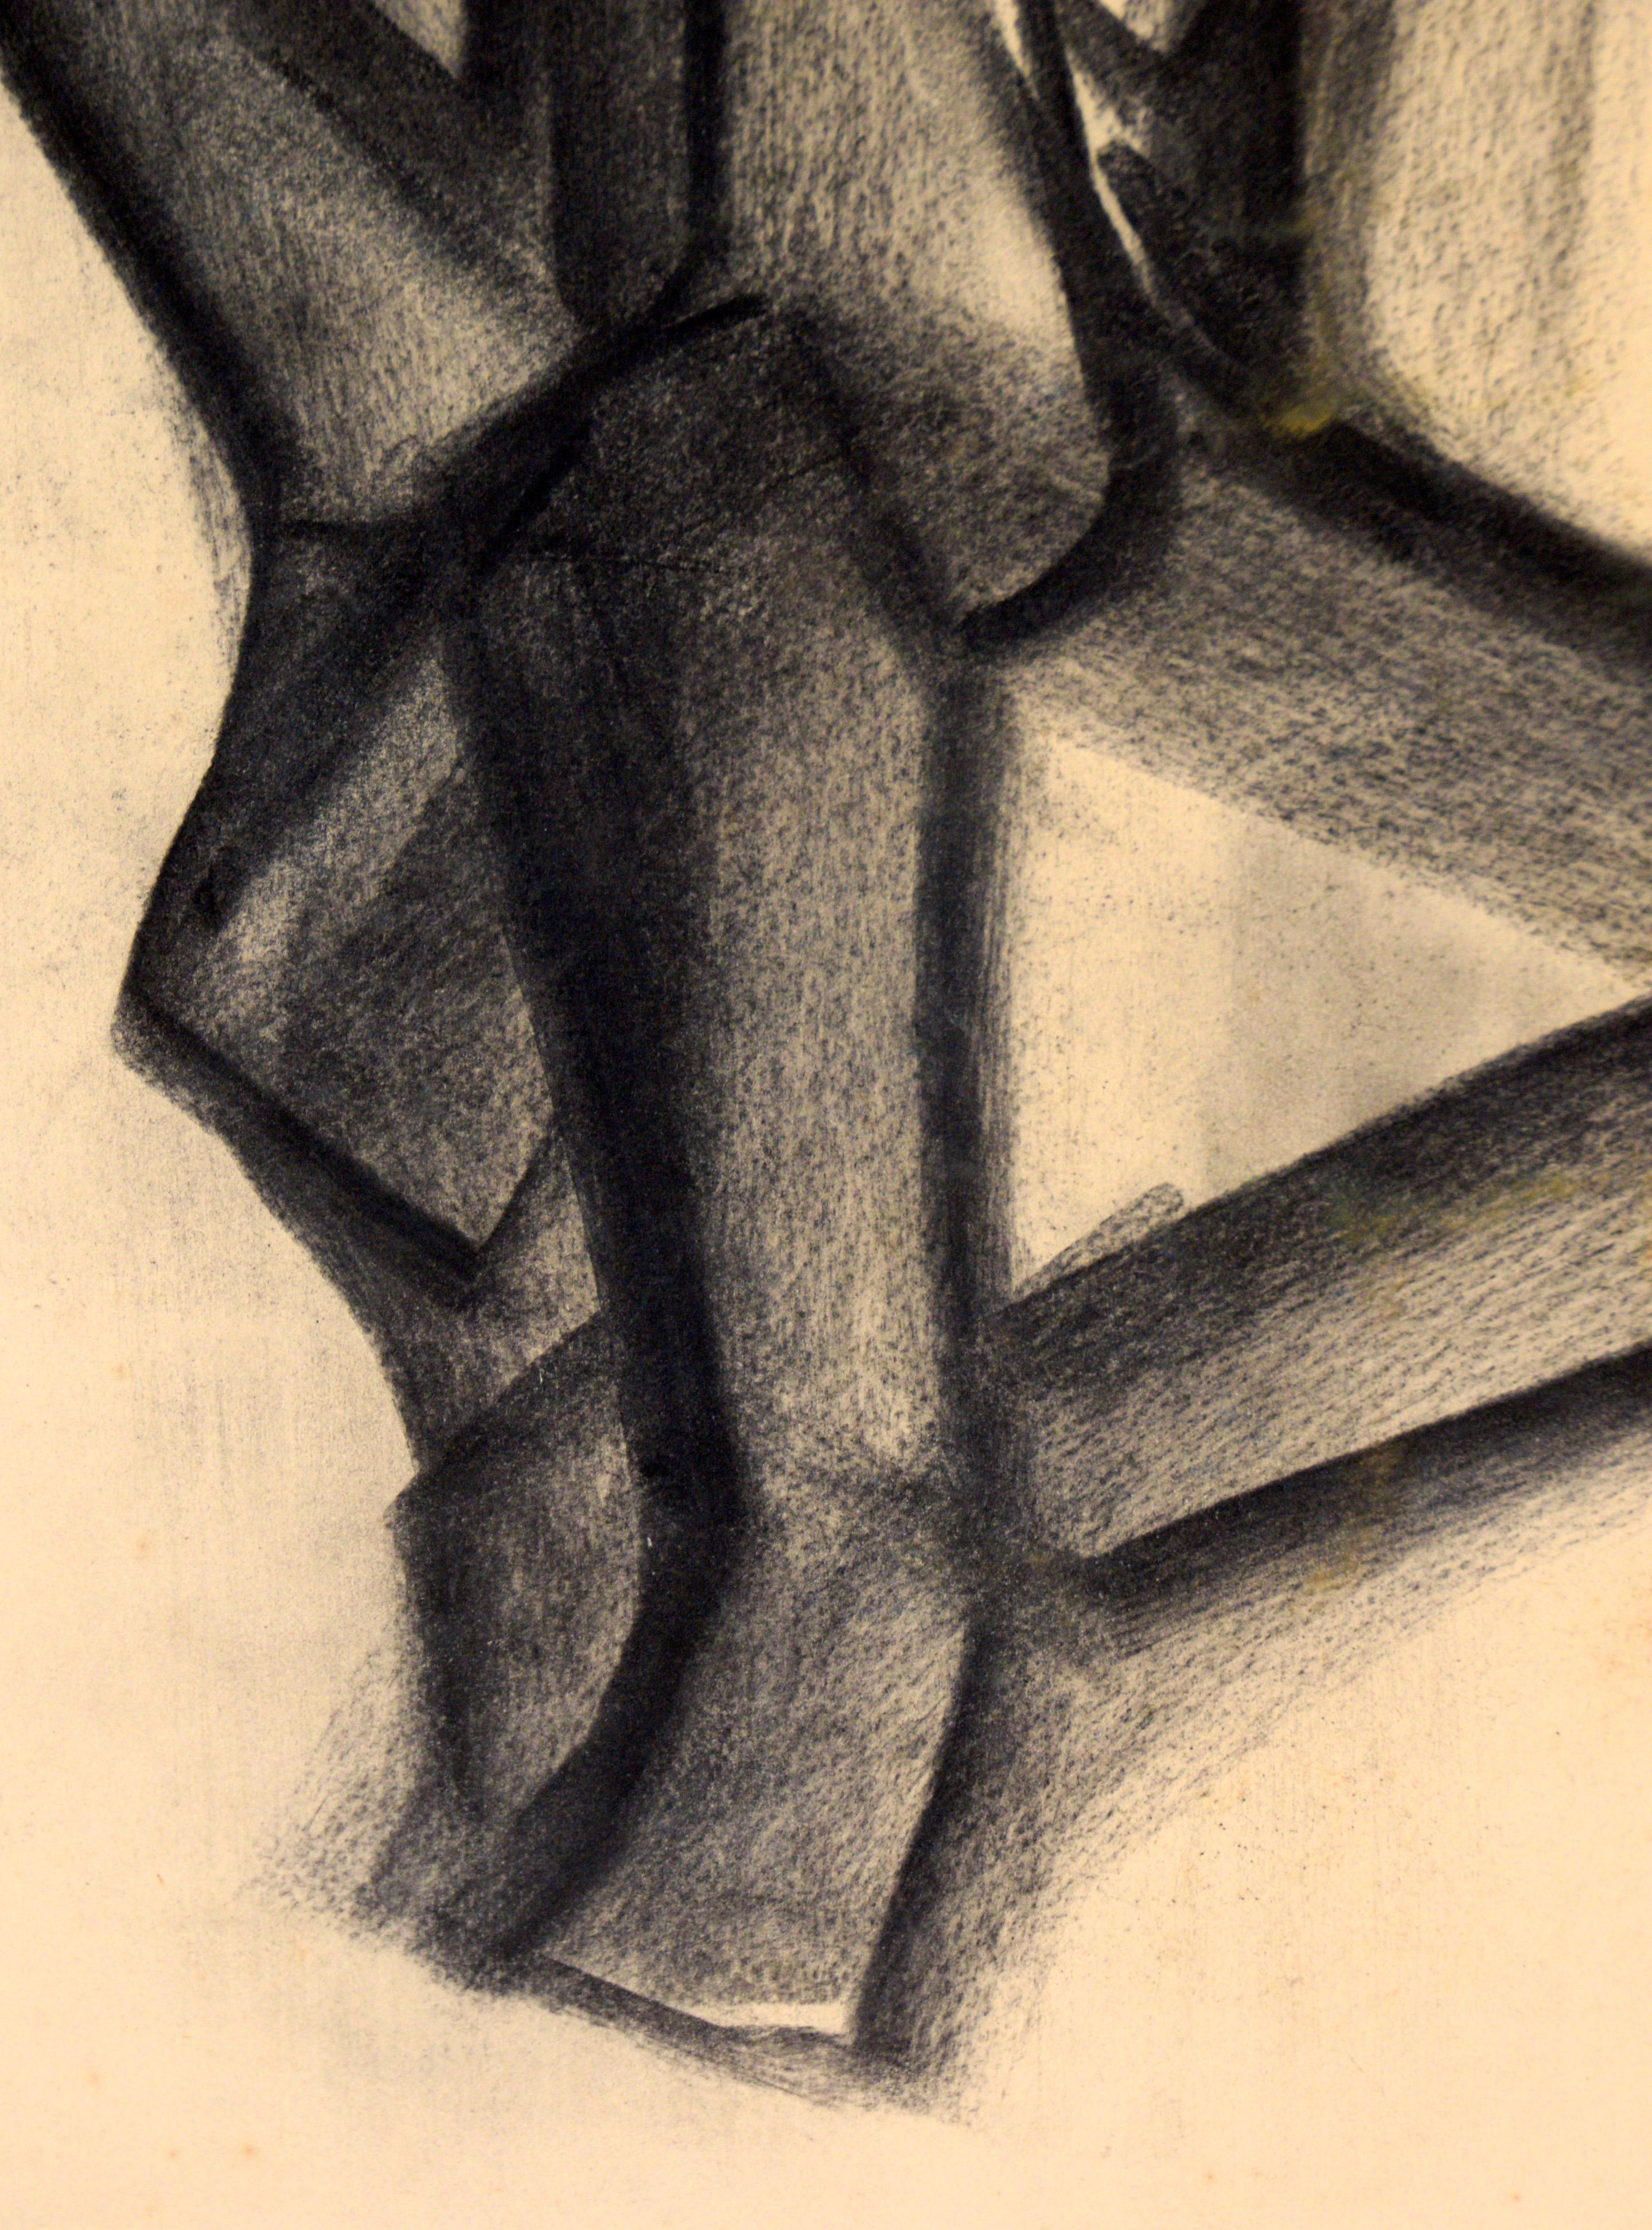 Cubist Charcoal Figure Drawing on Paper

Rich figurative drawing with wonderful depth to the composition by unknown artist. Artist has a strong command over charcoal as a medium, with broad, confident strokes in variations of measure and value.